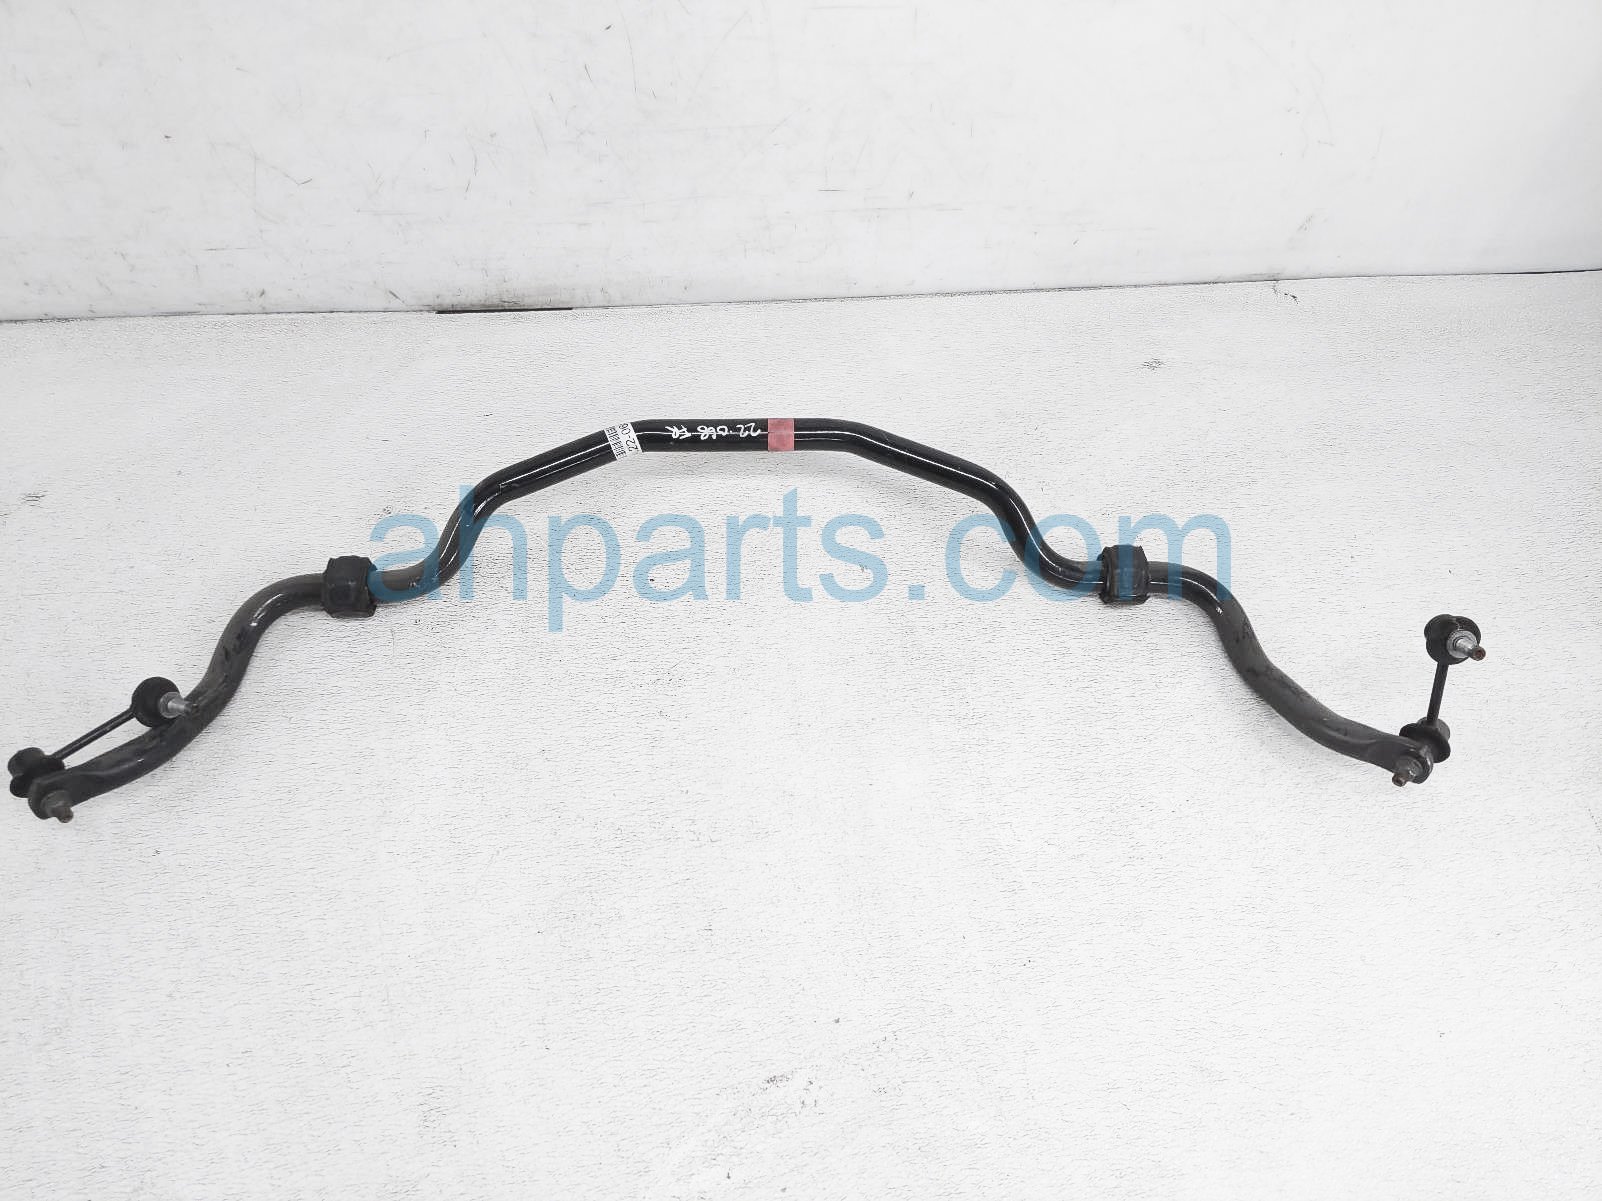 $100 Acura FRONT STABILIZER / SWAY BAR - AWD